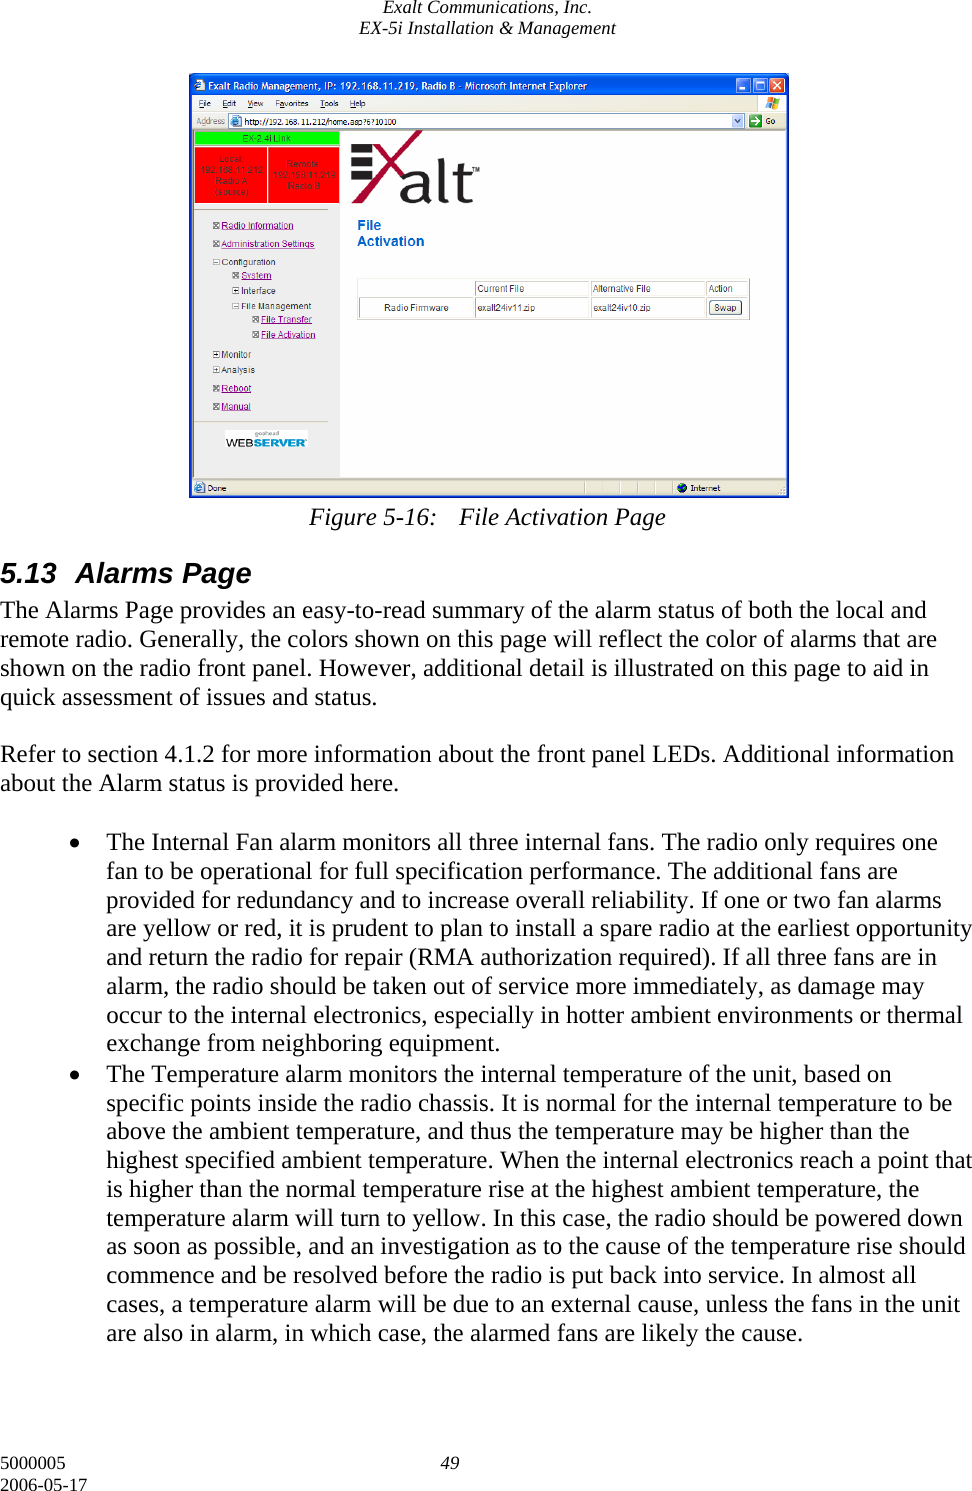 Exalt Communications, Inc. EX-5i Installation &amp; Management 5000005  49 2006-05-17                Figure 5-16:  File Activation Page 5.13 Alarms Page The Alarms Page provides an easy-to-read summary of the alarm status of both the local and remote radio. Generally, the colors shown on this page will reflect the color of alarms that are shown on the radio front panel. However, additional detail is illustrated on this page to aid in quick assessment of issues and status.  Refer to section 4.1.2 for more information about the front panel LEDs. Additional information about the Alarm status is provided here.  • The Internal Fan alarm monitors all three internal fans. The radio only requires one fan to be operational for full specification performance. The additional fans are provided for redundancy and to increase overall reliability. If one or two fan alarms are yellow or red, it is prudent to plan to install a spare radio at the earliest opportunity and return the radio for repair (RMA authorization required). If all three fans are in alarm, the radio should be taken out of service more immediately, as damage may occur to the internal electronics, especially in hotter ambient environments or thermal exchange from neighboring equipment. • The Temperature alarm monitors the internal temperature of the unit, based on specific points inside the radio chassis. It is normal for the internal temperature to be above the ambient temperature, and thus the temperature may be higher than the highest specified ambient temperature. When the internal electronics reach a point that is higher than the normal temperature rise at the highest ambient temperature, the temperature alarm will turn to yellow. In this case, the radio should be powered down as soon as possible, and an investigation as to the cause of the temperature rise should commence and be resolved before the radio is put back into service. In almost all cases, a temperature alarm will be due to an external cause, unless the fans in the unit are also in alarm, in which case, the alarmed fans are likely the cause. 